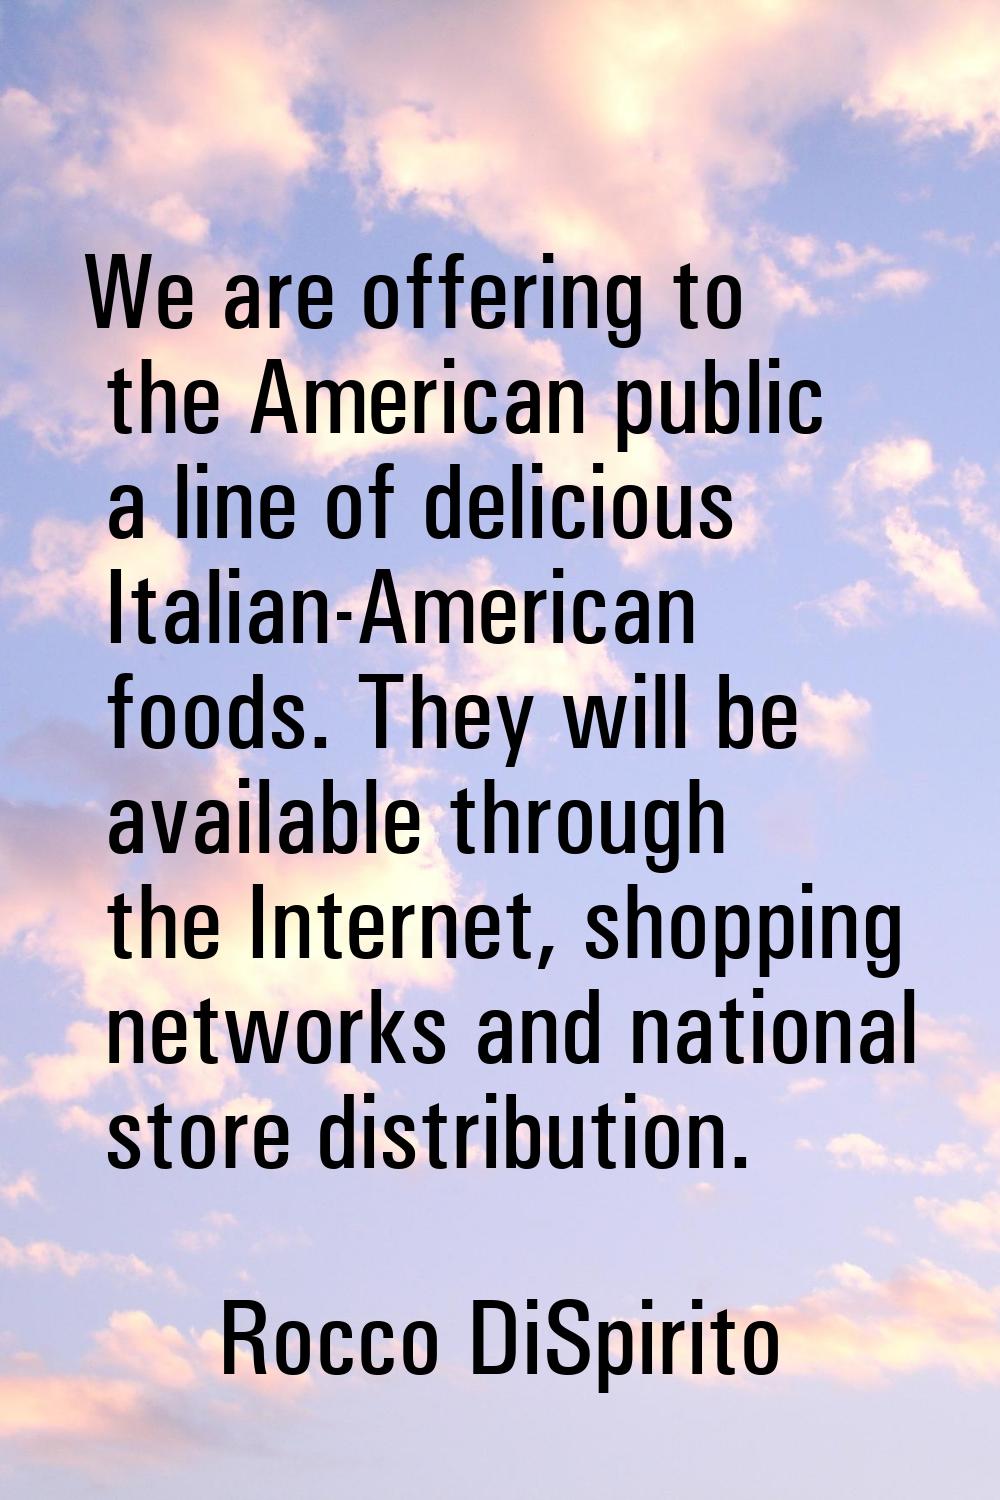 We are offering to the American public a line of delicious Italian-American foods. They will be ava